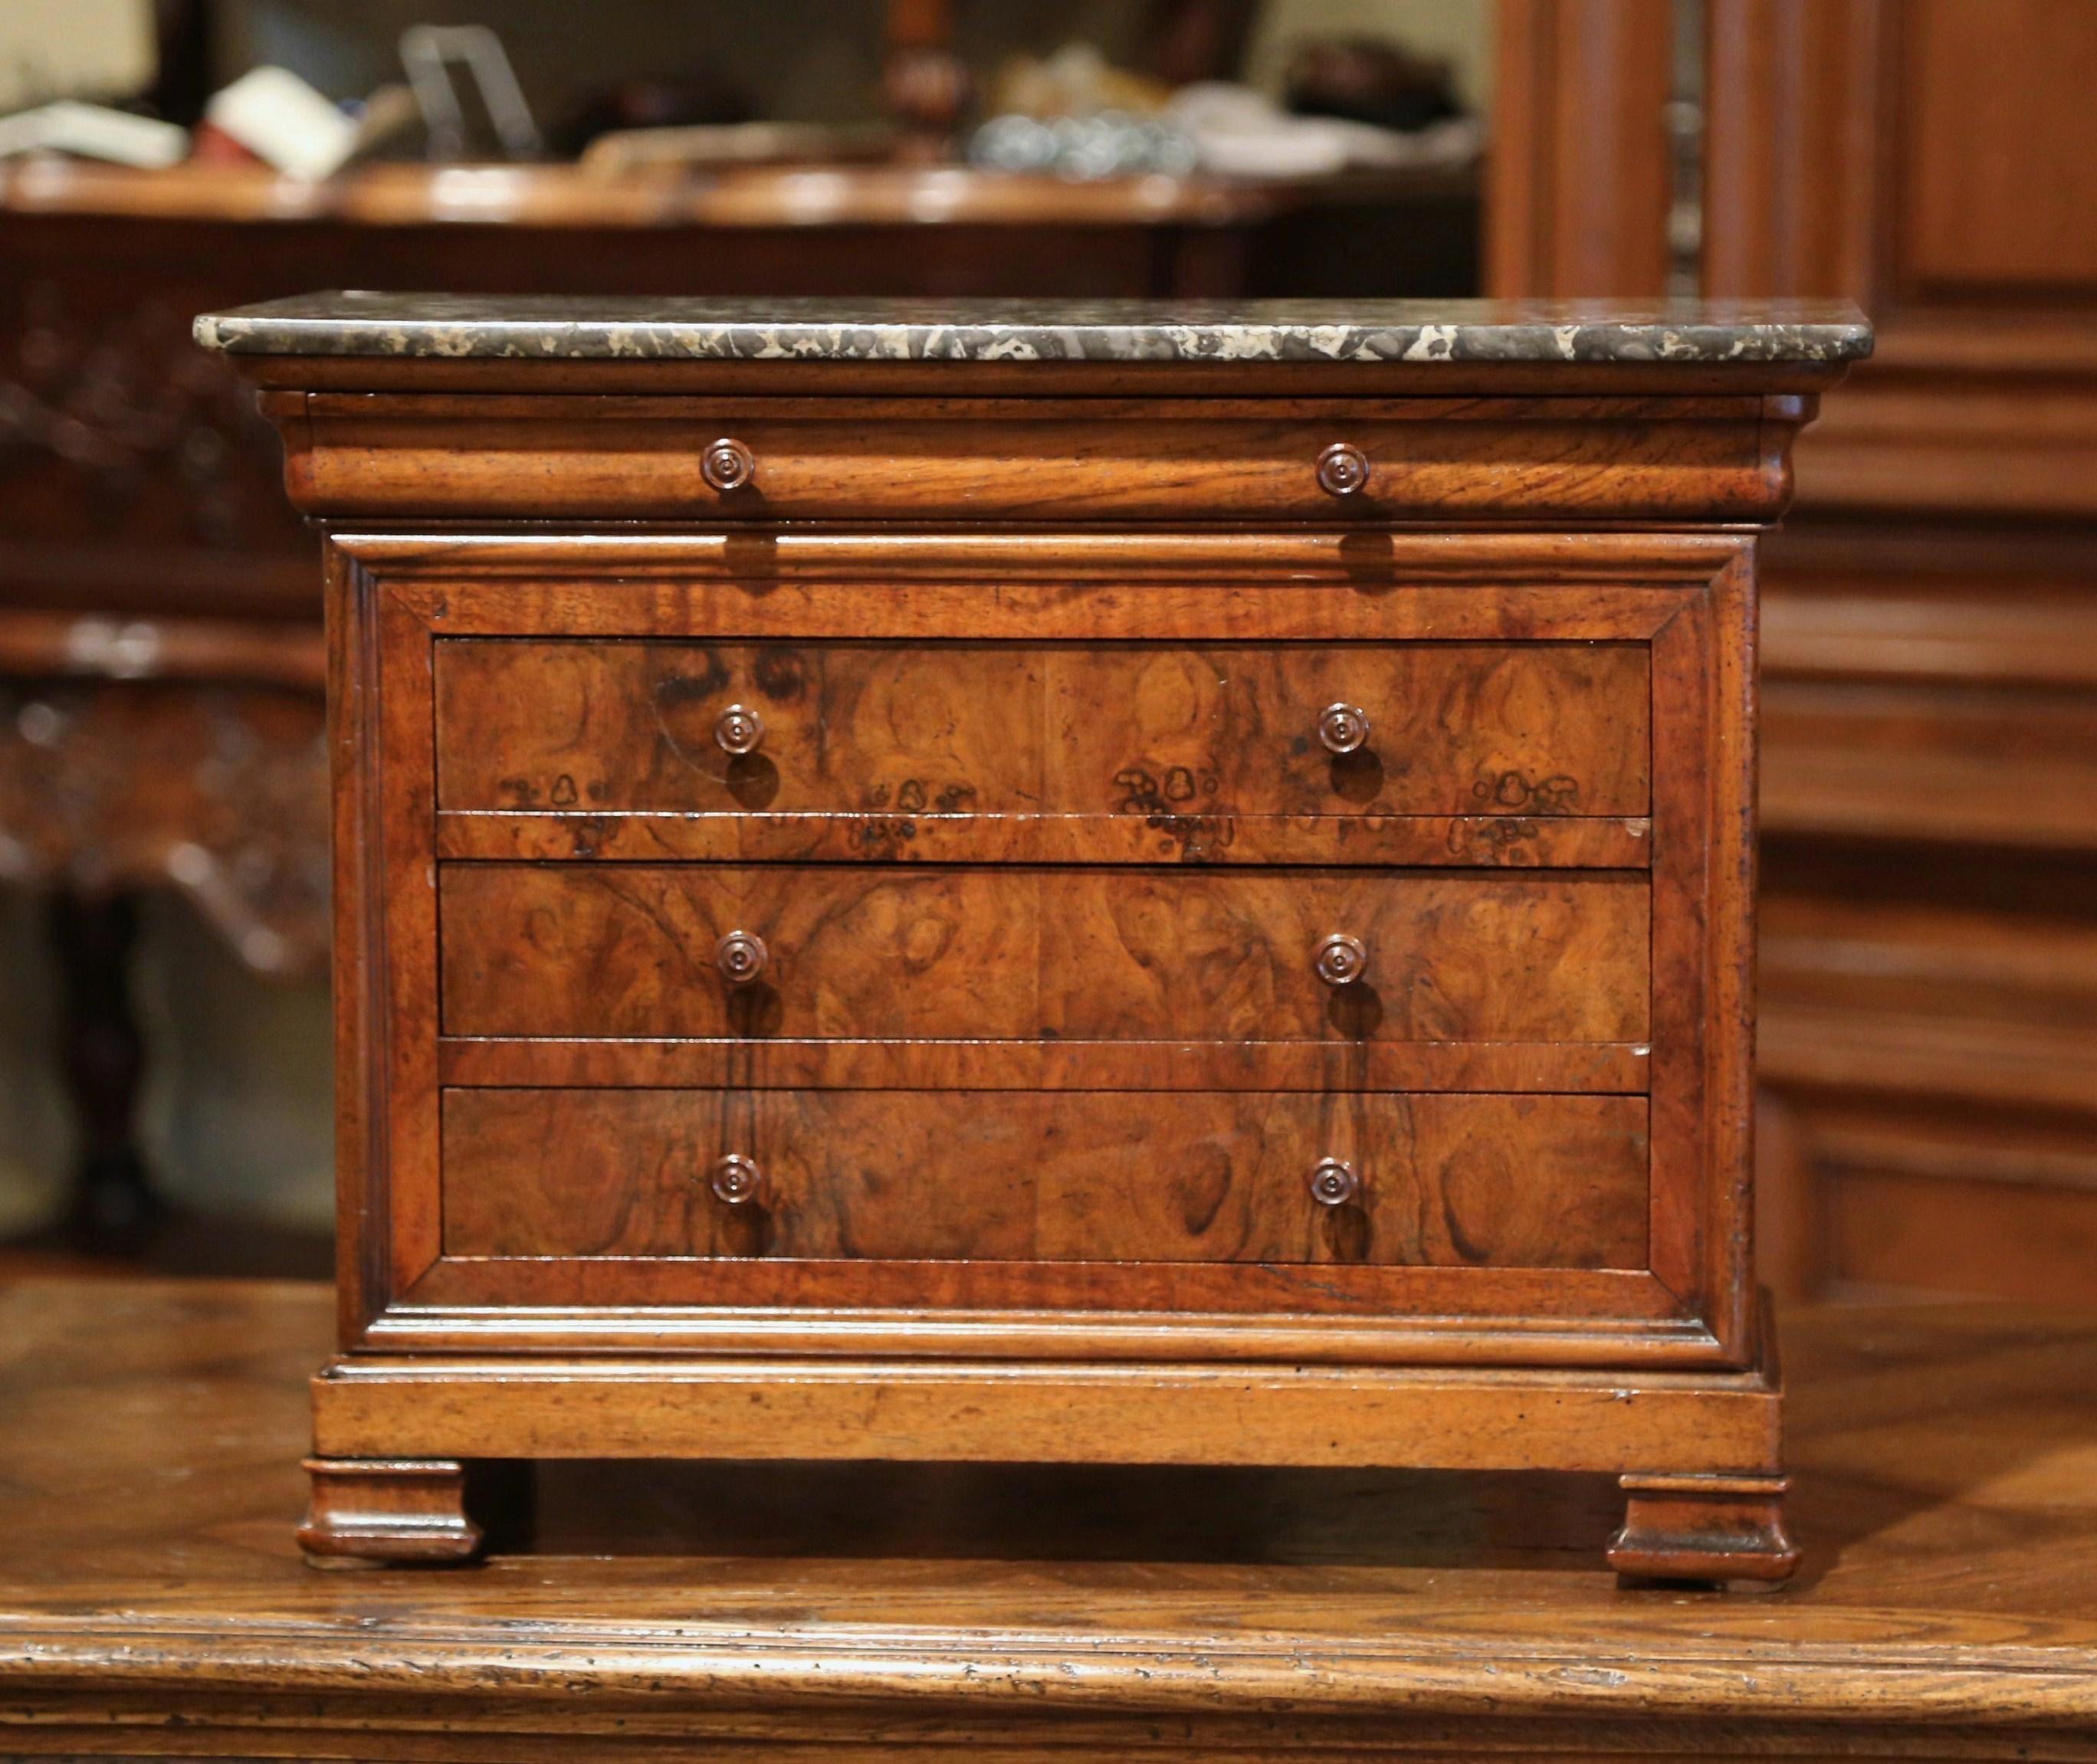 Decorate a master bathroom counter with this miniature chest of drawers. Crafted in France circa 1890, the petite fruitwood 